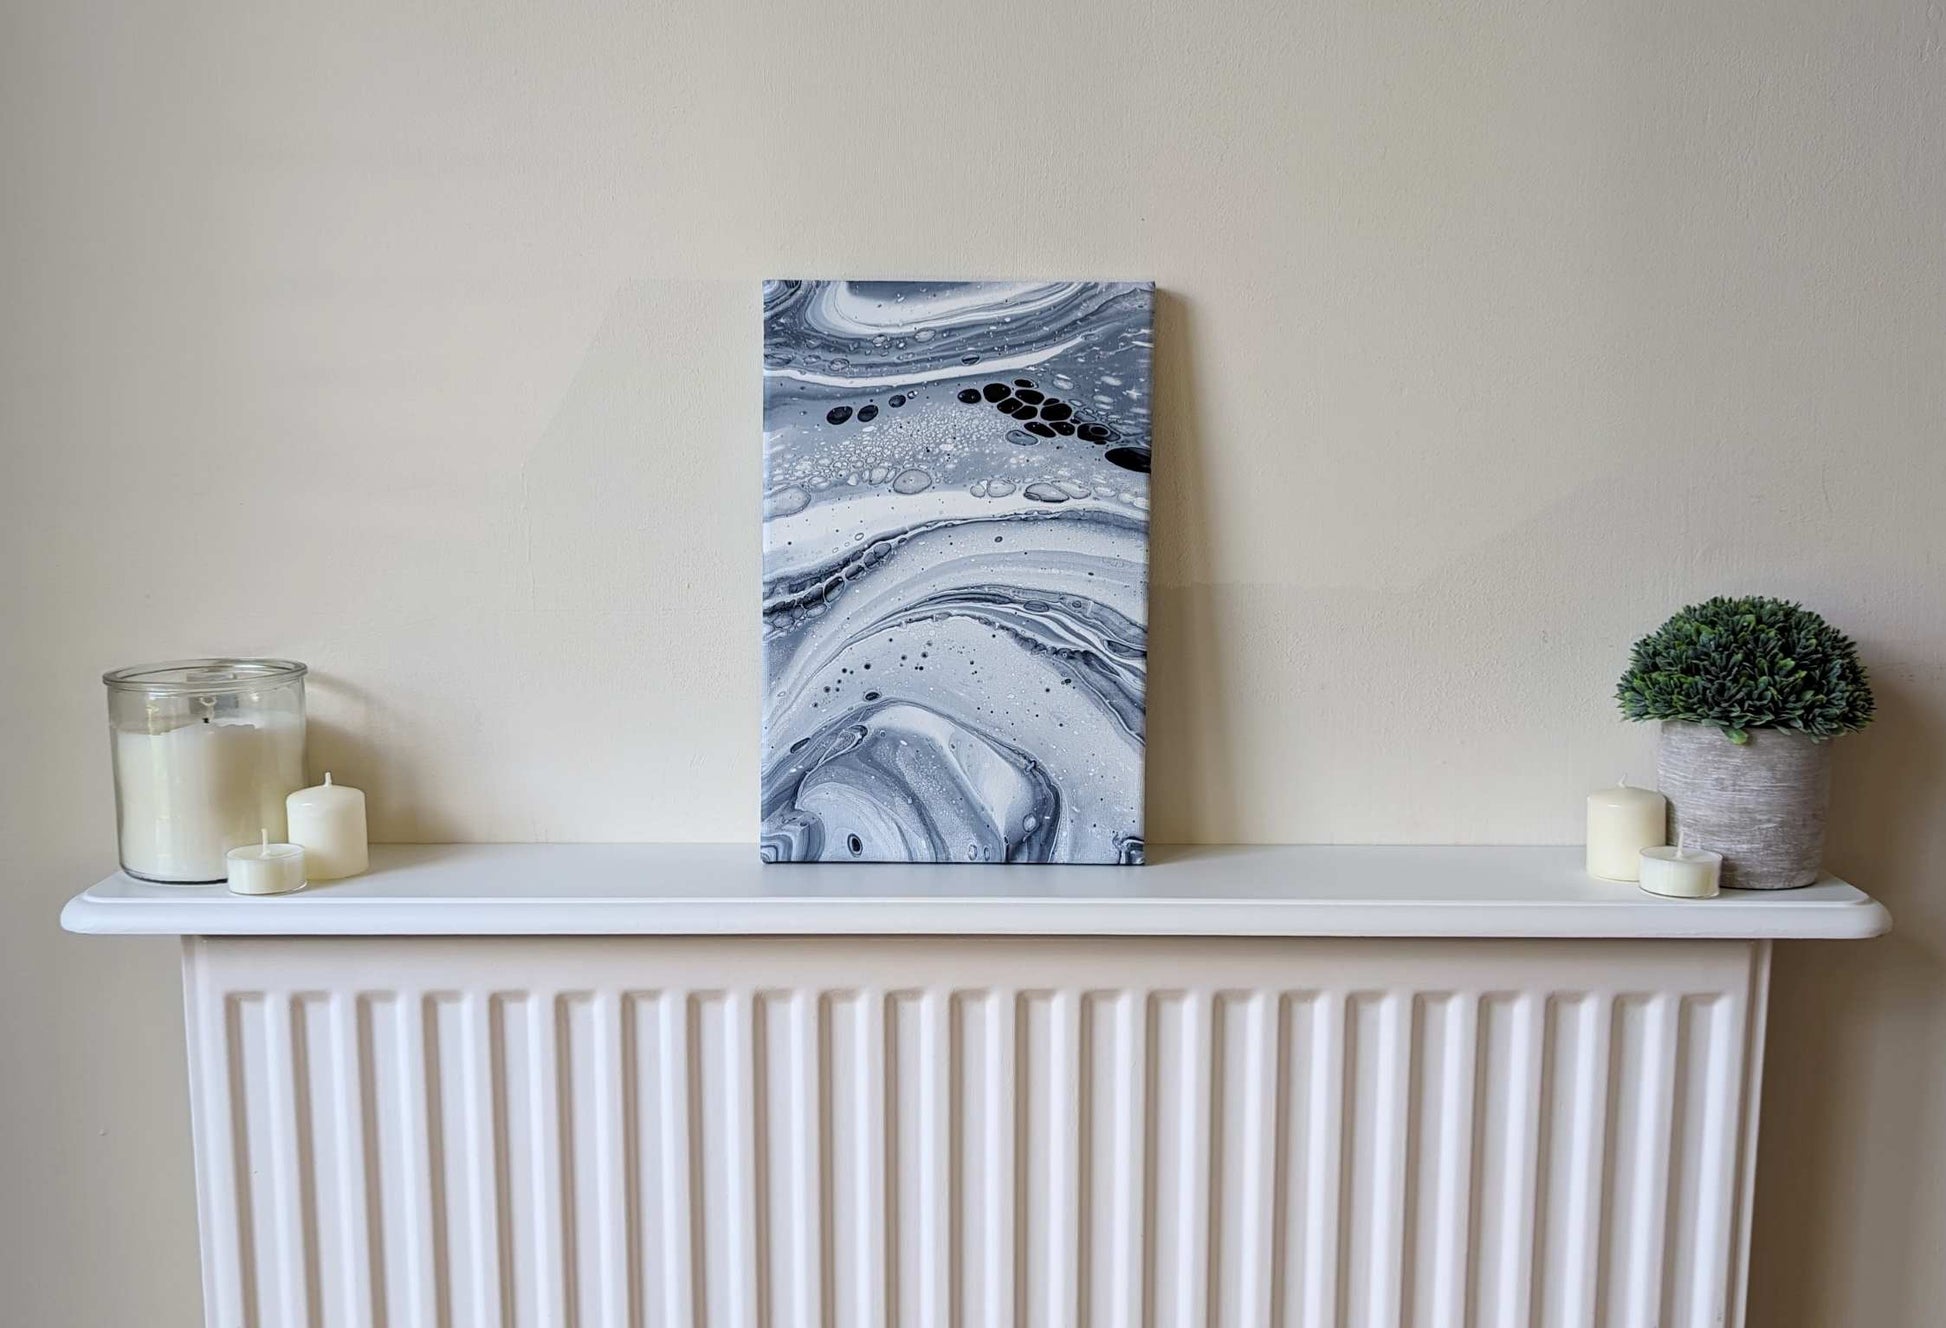 Canvas on shelf – frontal view of original abstract painting. Made with professional grade acrylic paint: Payne’s grey and white.